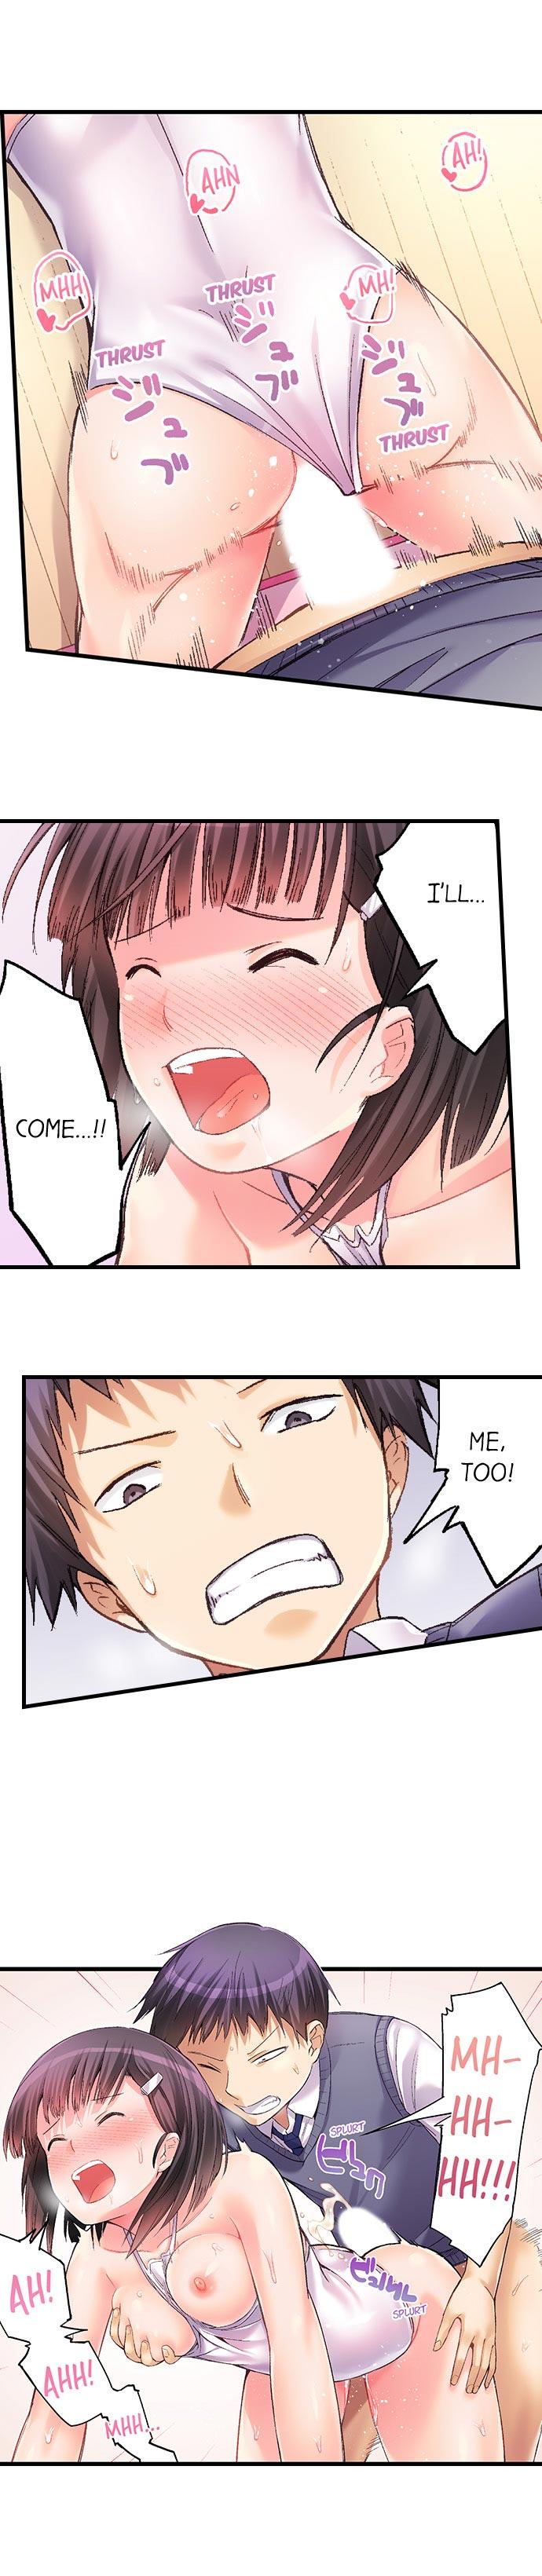 No Panty Booty Workout! Ch. 1 - 6 53